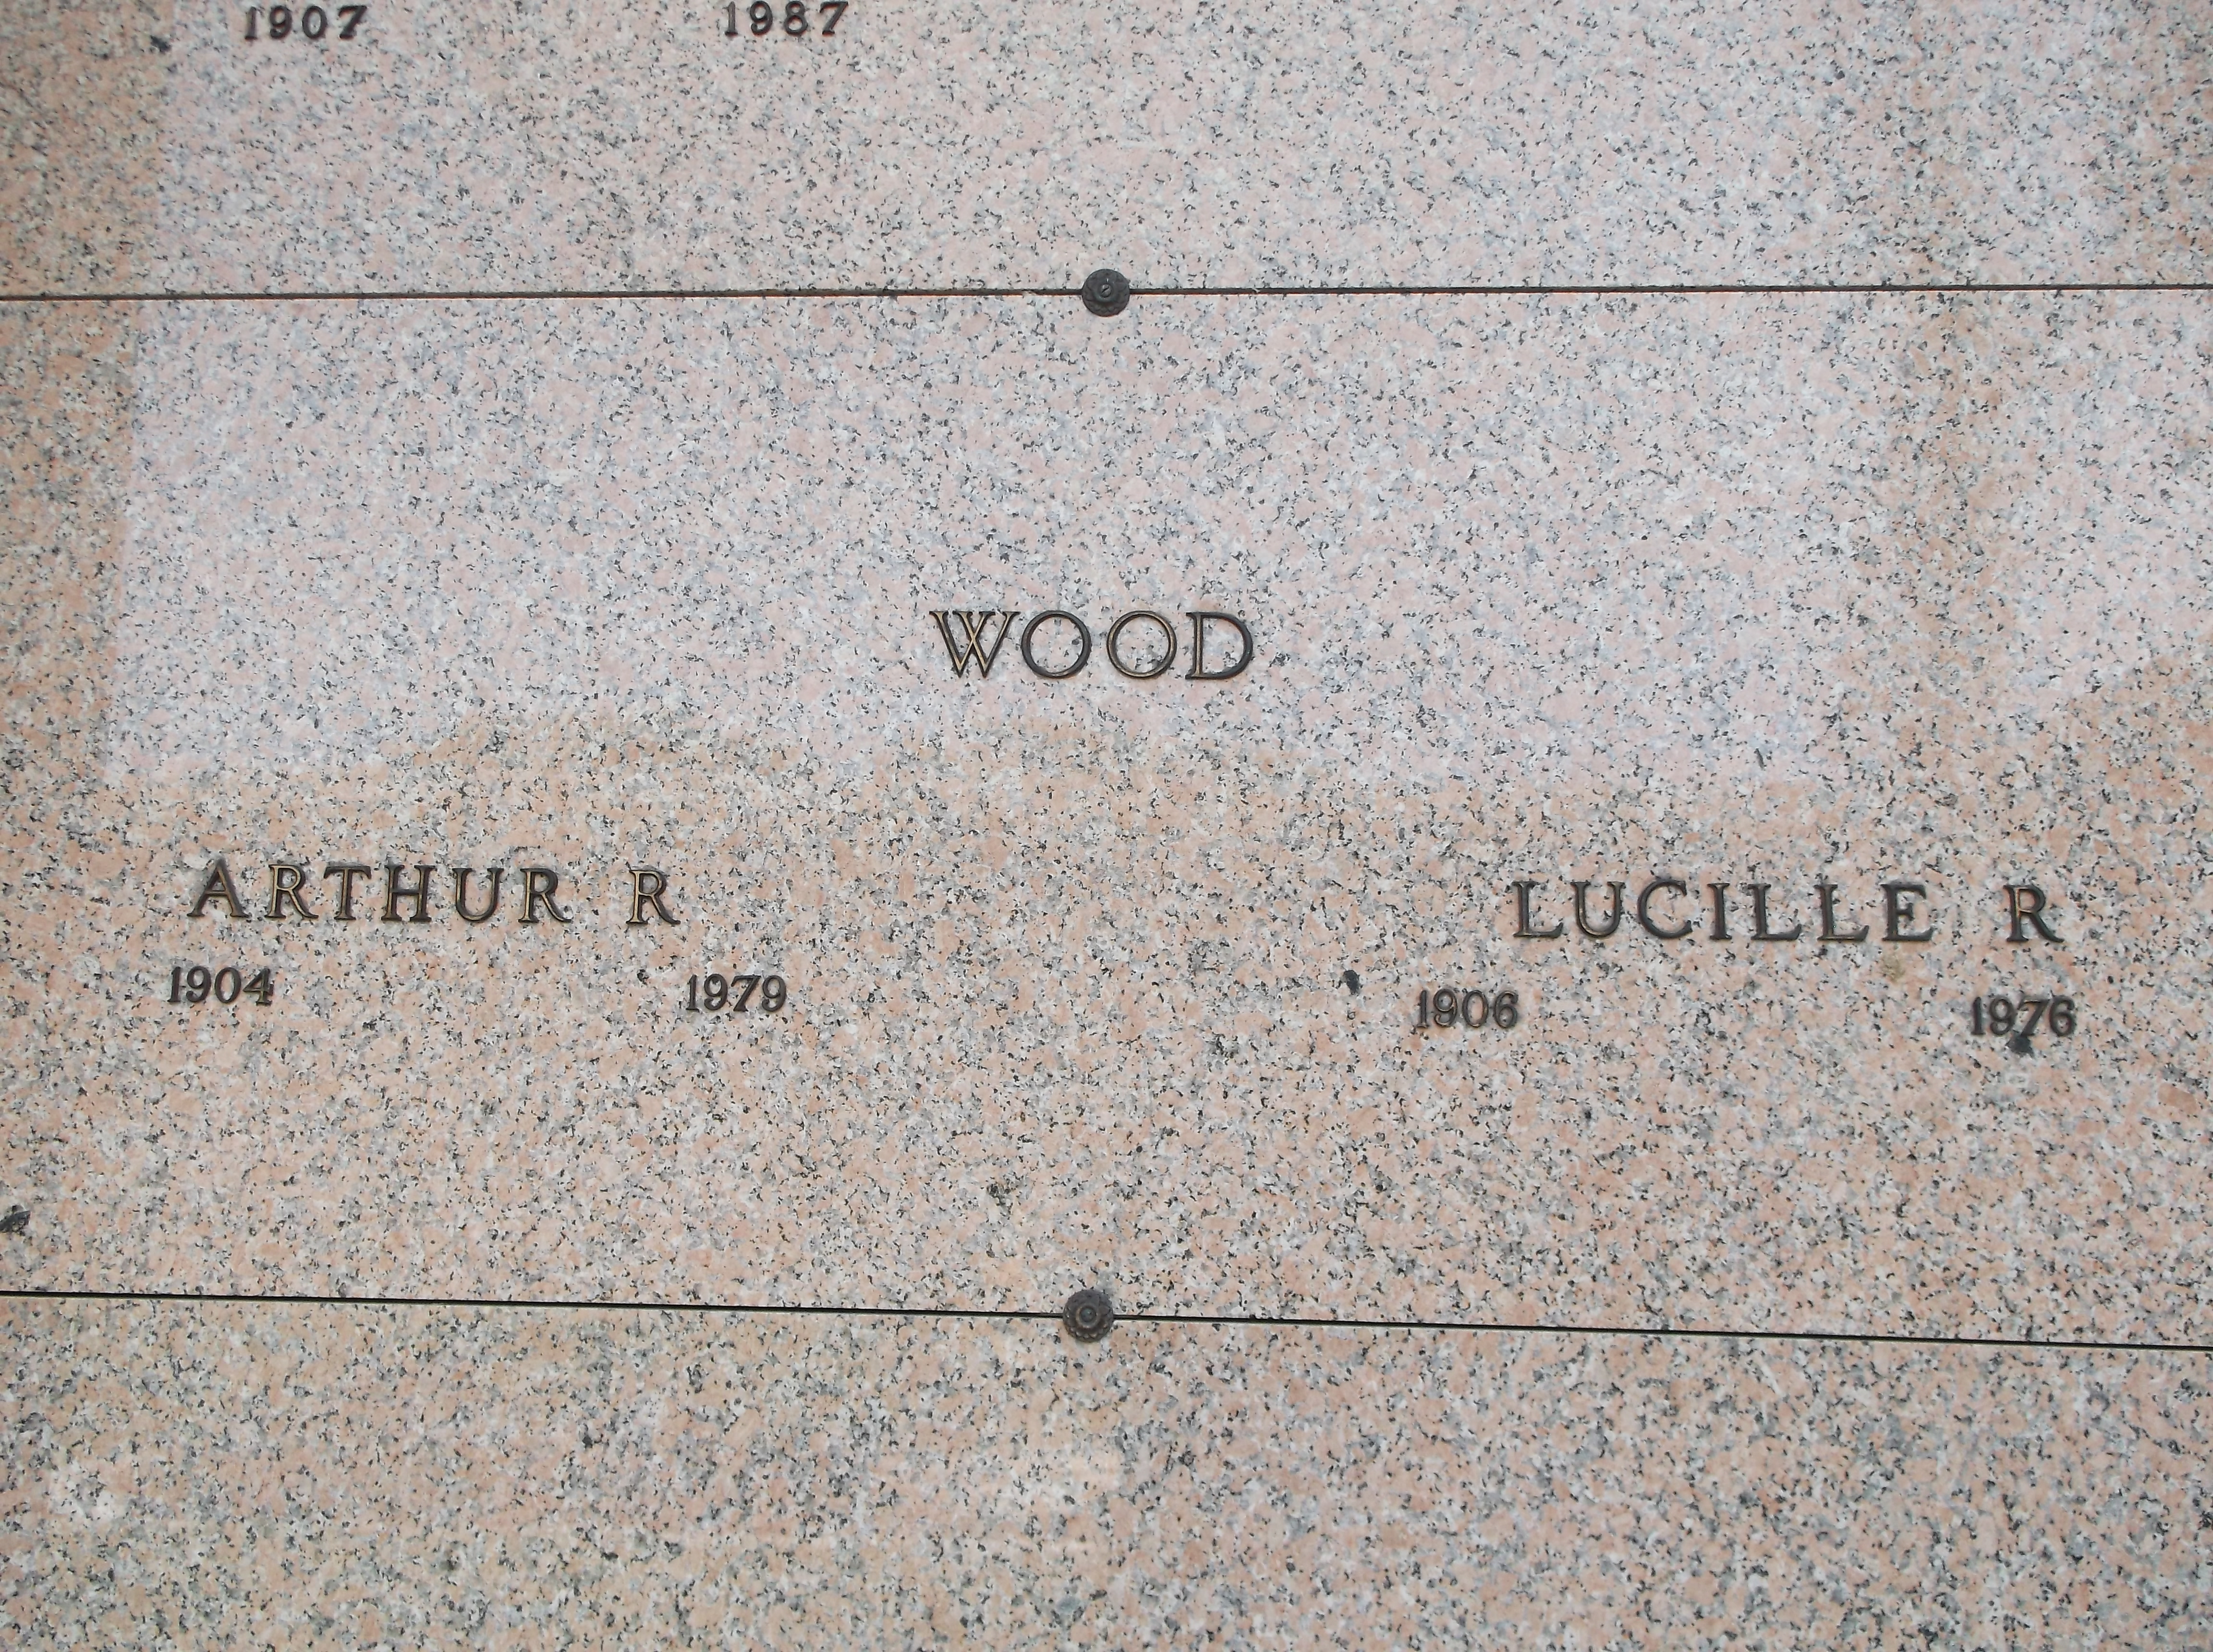 Lucille R Wood